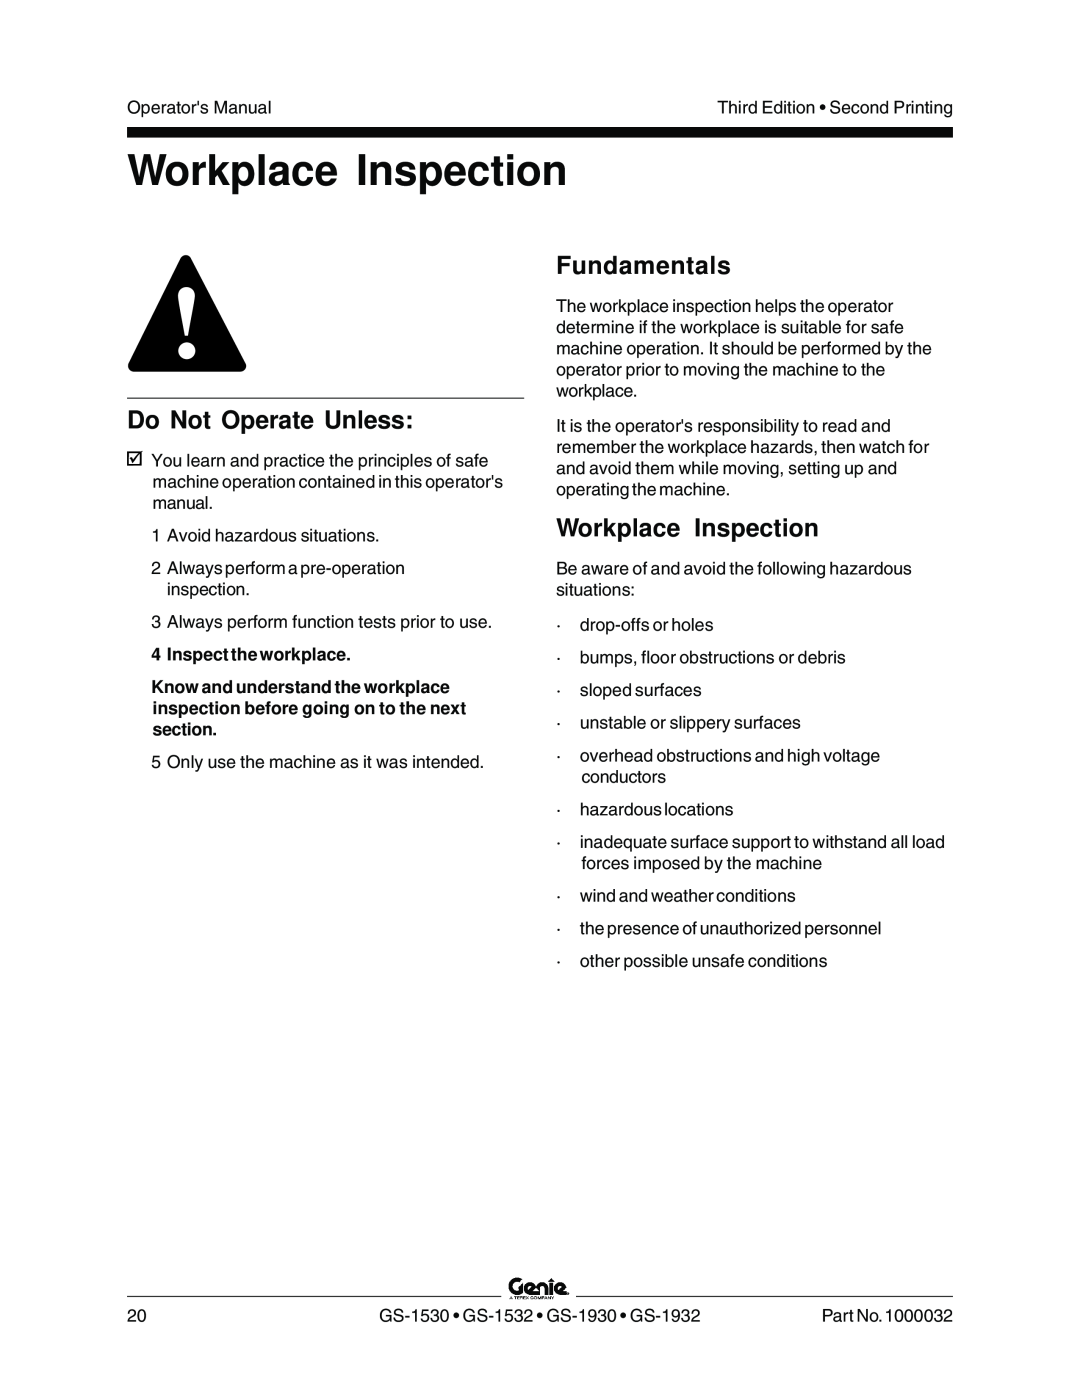 Genie GS-1530, GS-1930, CE, GS-1532 manual Workplace Inspection, 4Inspect the workplace, Do Not Operate Unless, Fundamentals 